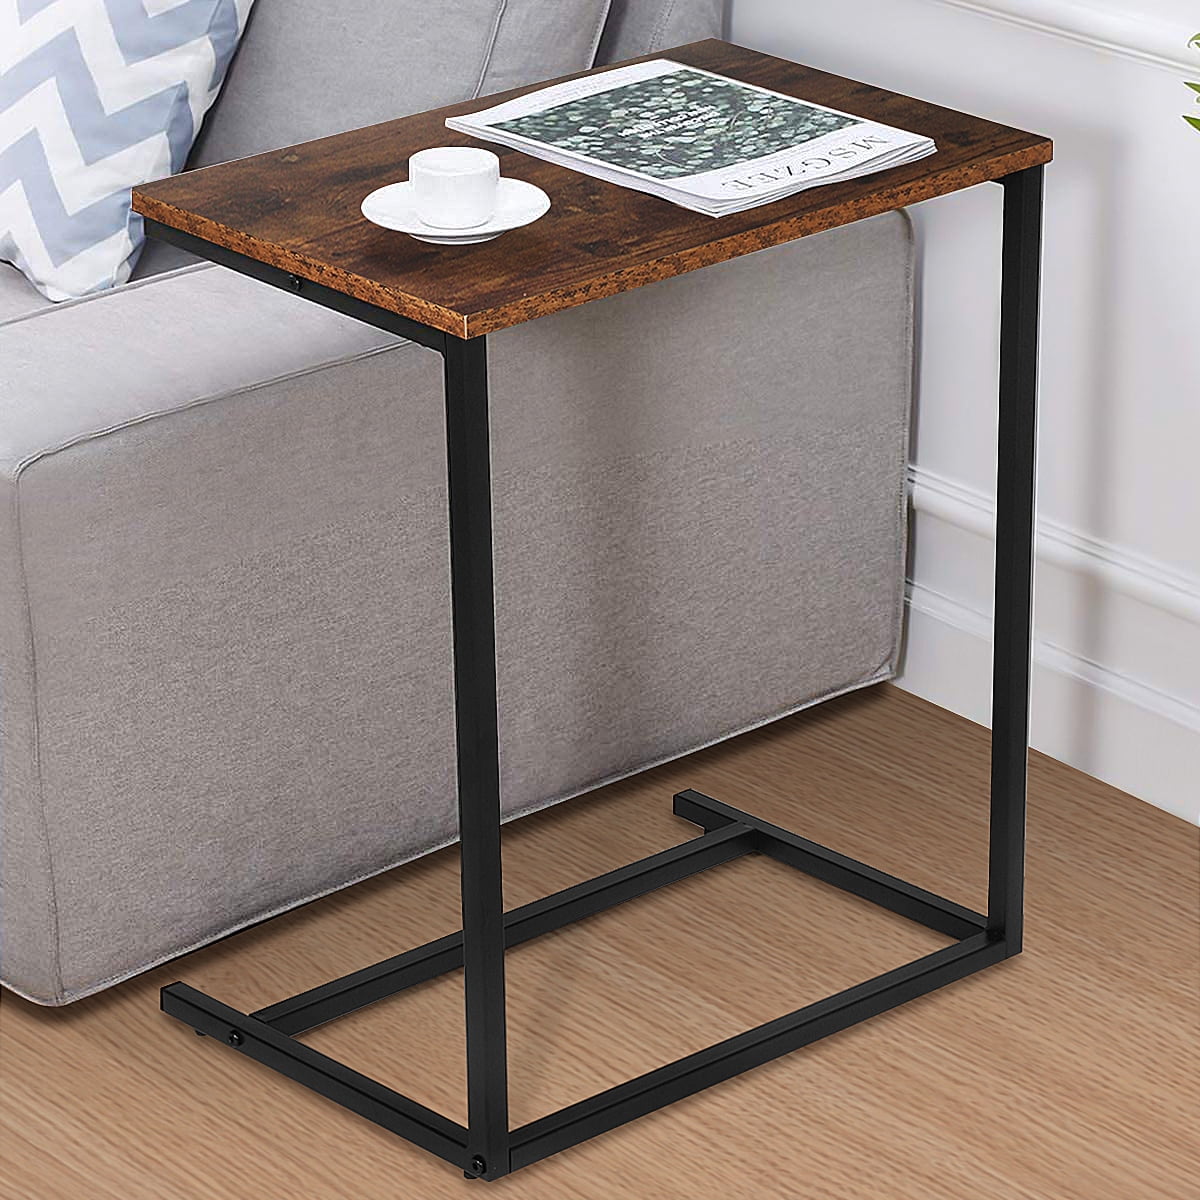 End Side Tables For Small Spaces C Shape Coffee Sofa Couch Room Console Stand 